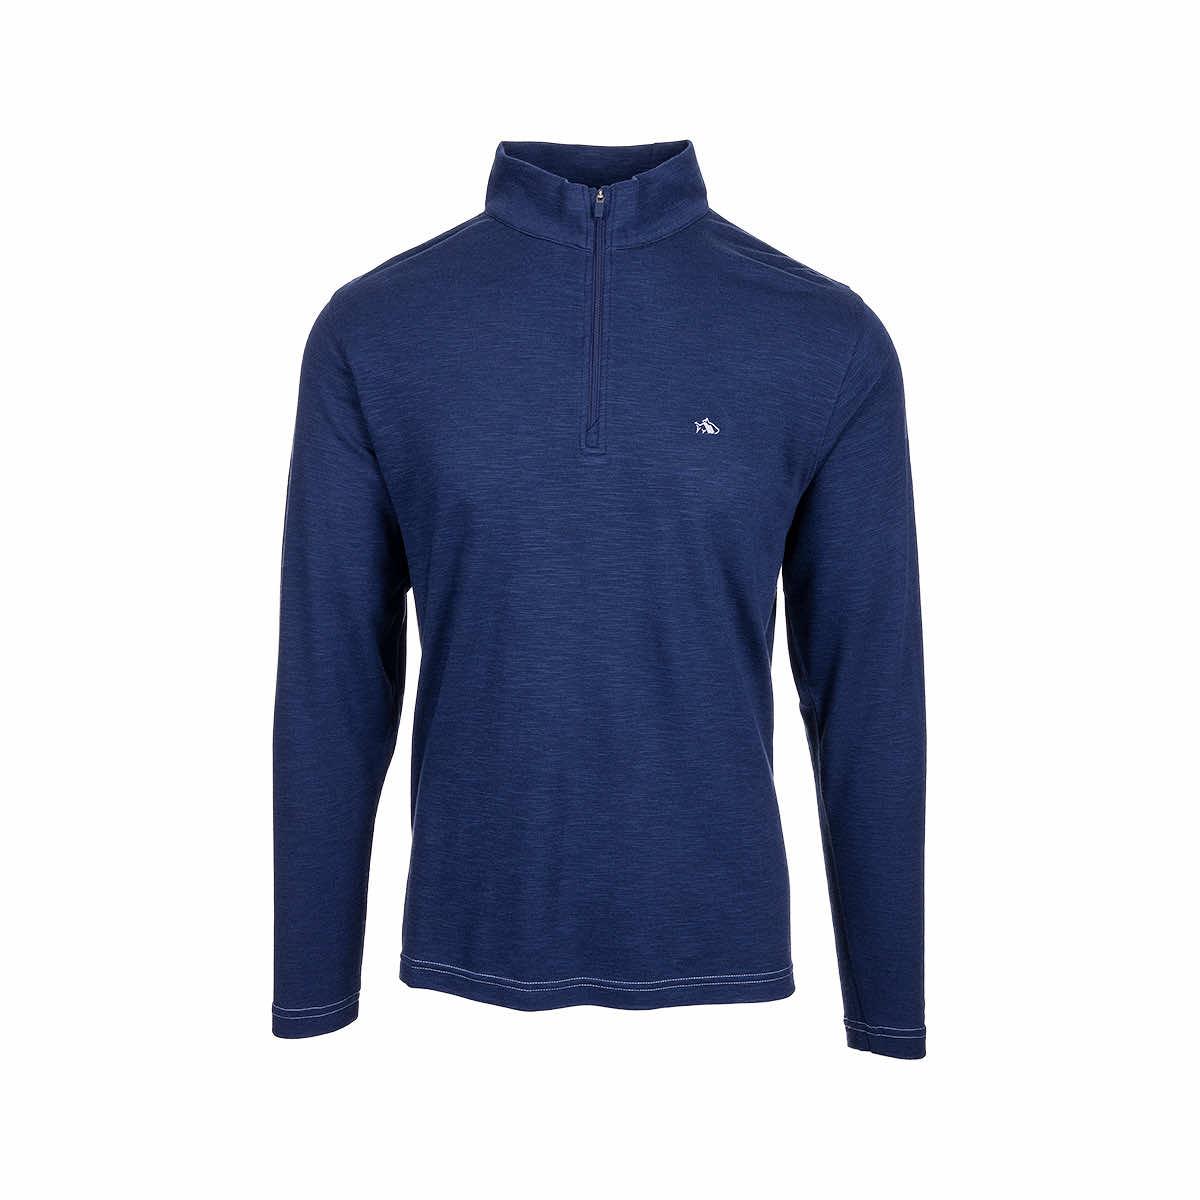  Men's Shad Point Long Sleeve Pullover